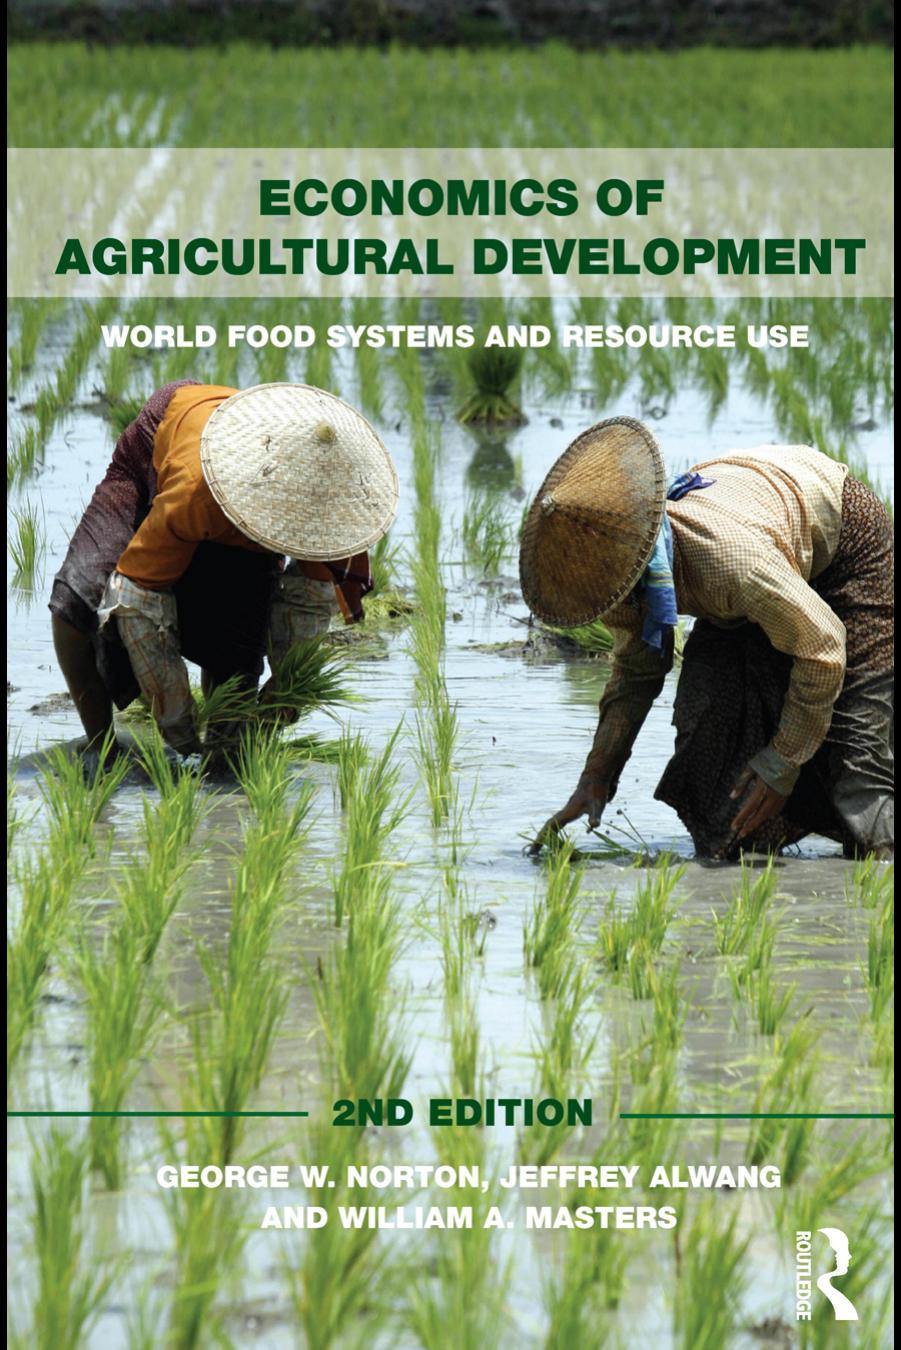 Economics of Agricultural Development: World Food Systems and Resource Use, Second Edition